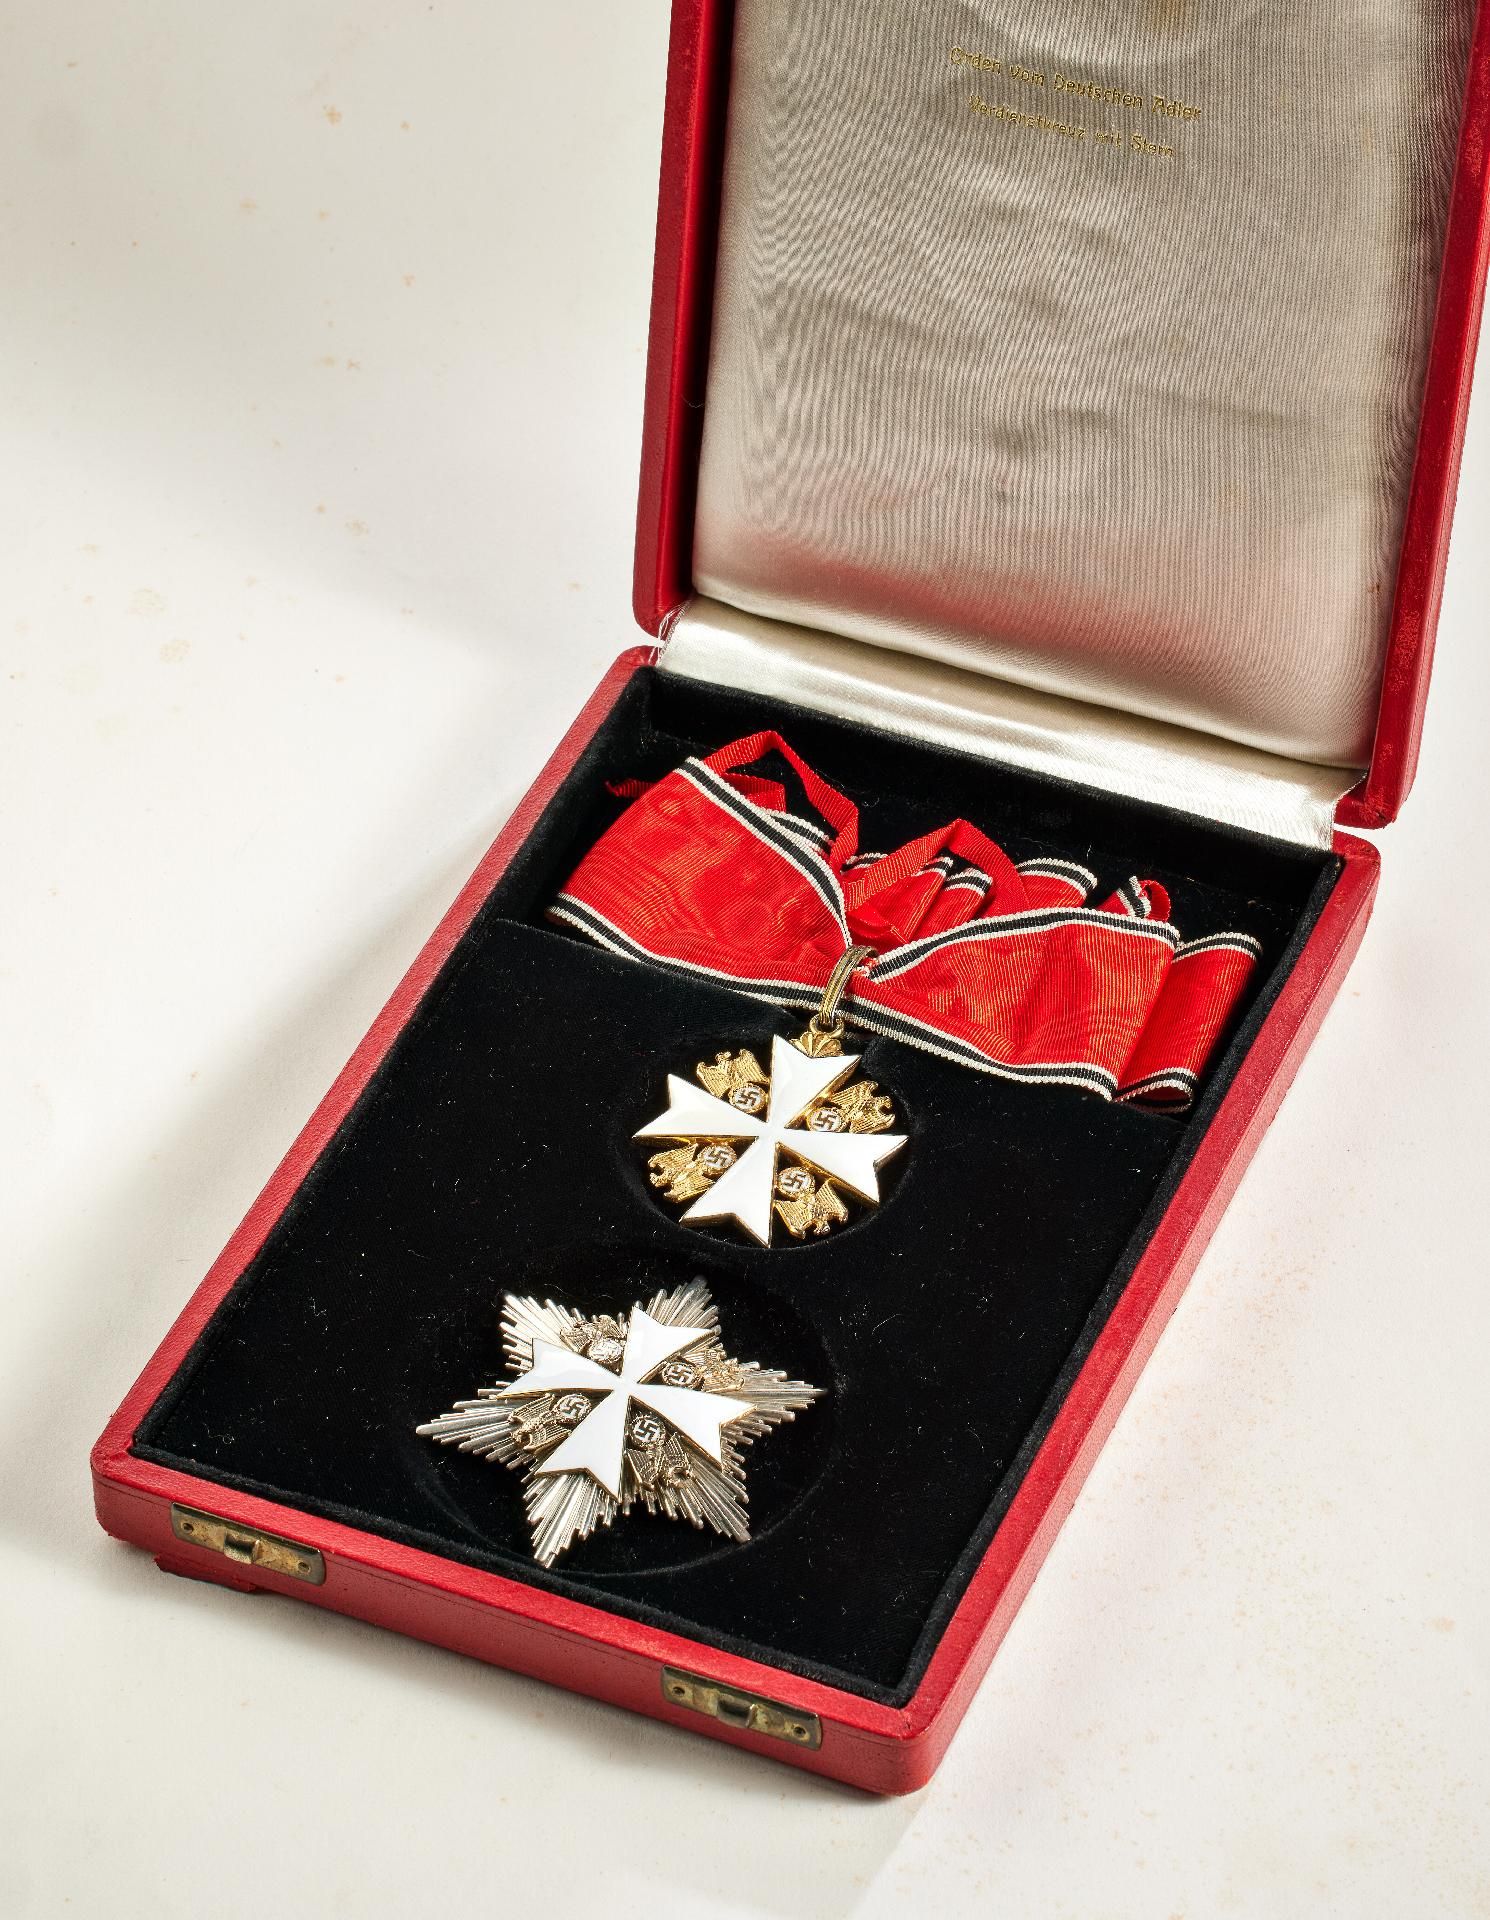 German Eagle Order : Order of the German Eagle: Cross of Merit with Star (3rd class). In the ori...